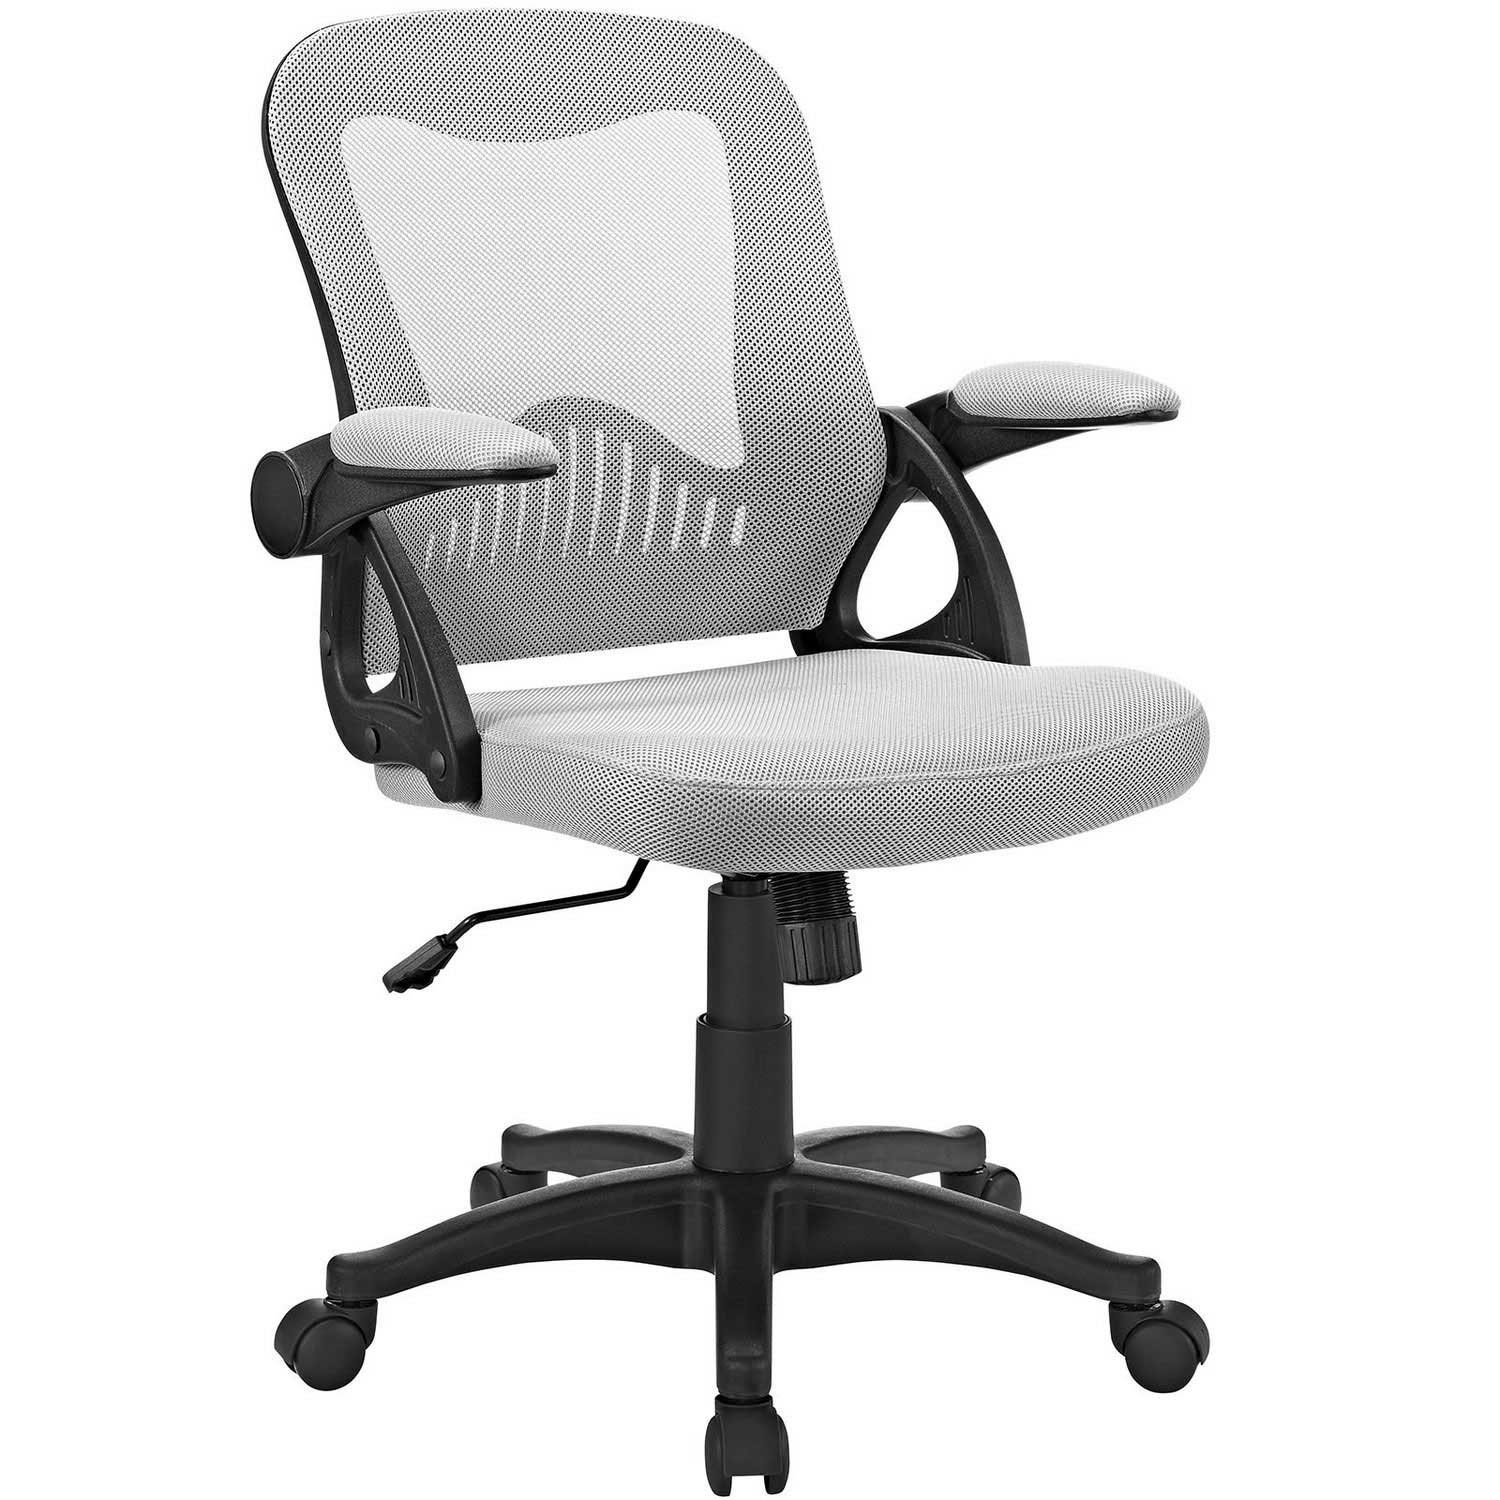 Modway Advance Office Chair - Gray